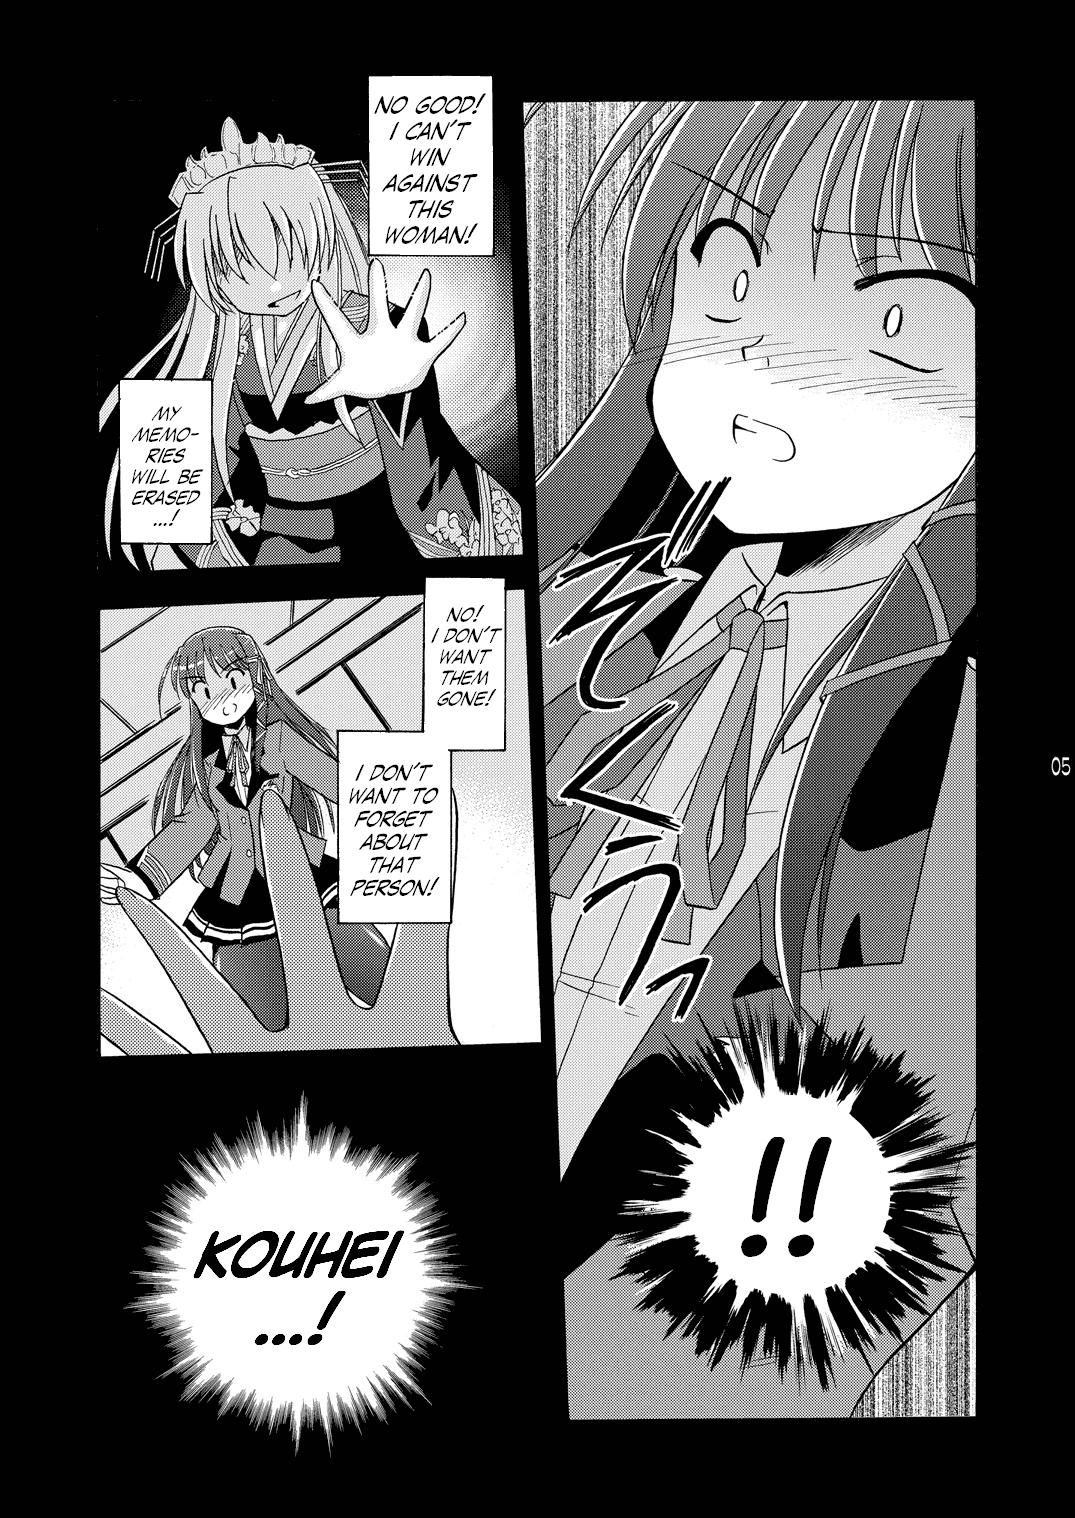 Best Blowjobs Wheel of Fortune - Fortune arterial Dicks - Page 6